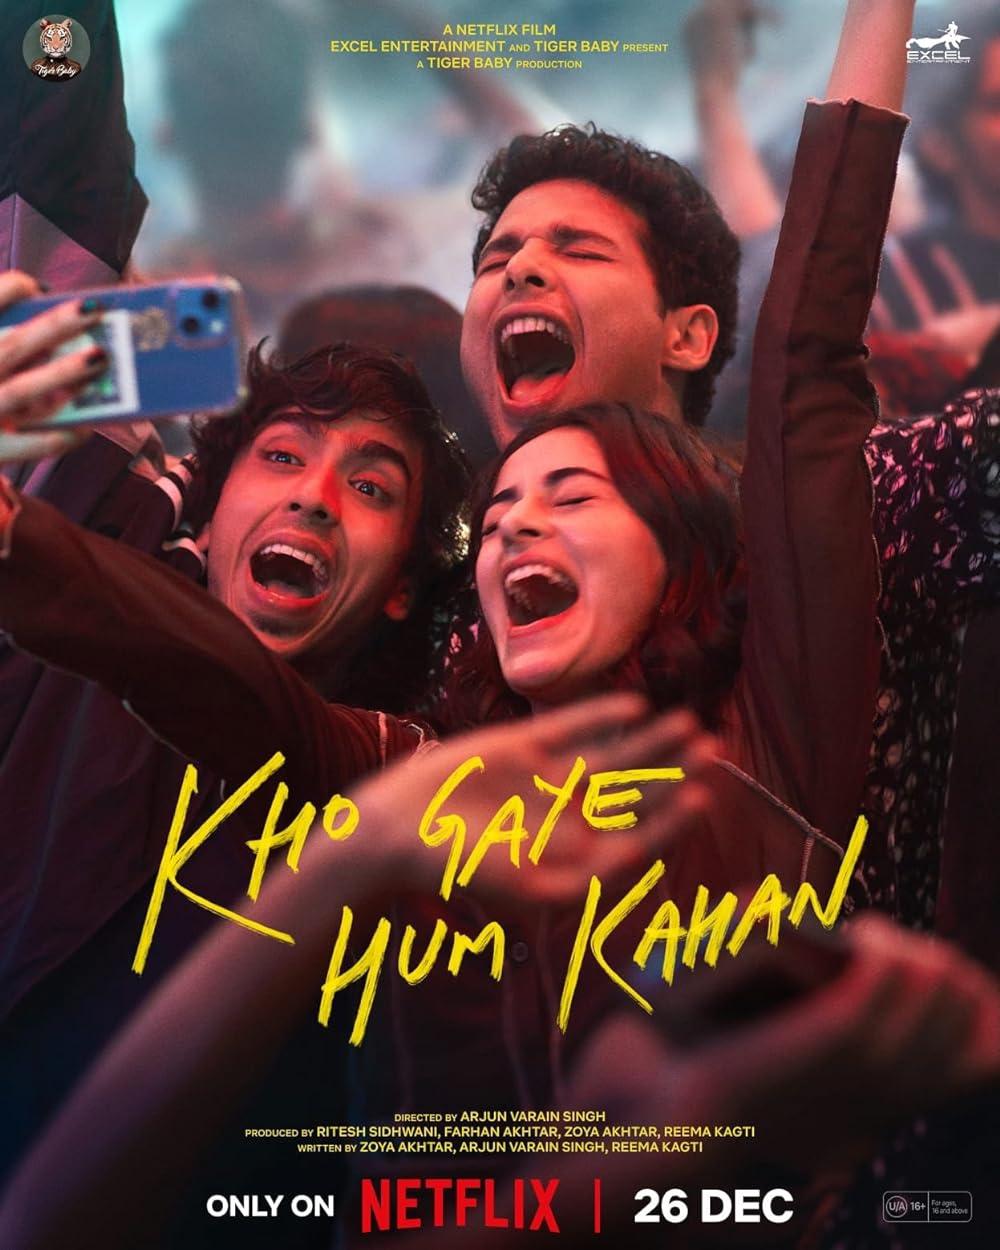 Kho Gaye Hum Kahan (December 26)- Streaming on NetflixIn a world where keeping up with appearances online sometimes overshadows reality, our friends are the anchors that keep us grounded. Kho Gaye Hum Kahan, Netflix’s new coming-of-digital-age drama, celebrates the power of friendship in the fast-paced era of social media. Premiering on December 26, the film follows three best friends as they navigate life, striving to balance their online identities with their true selves. 